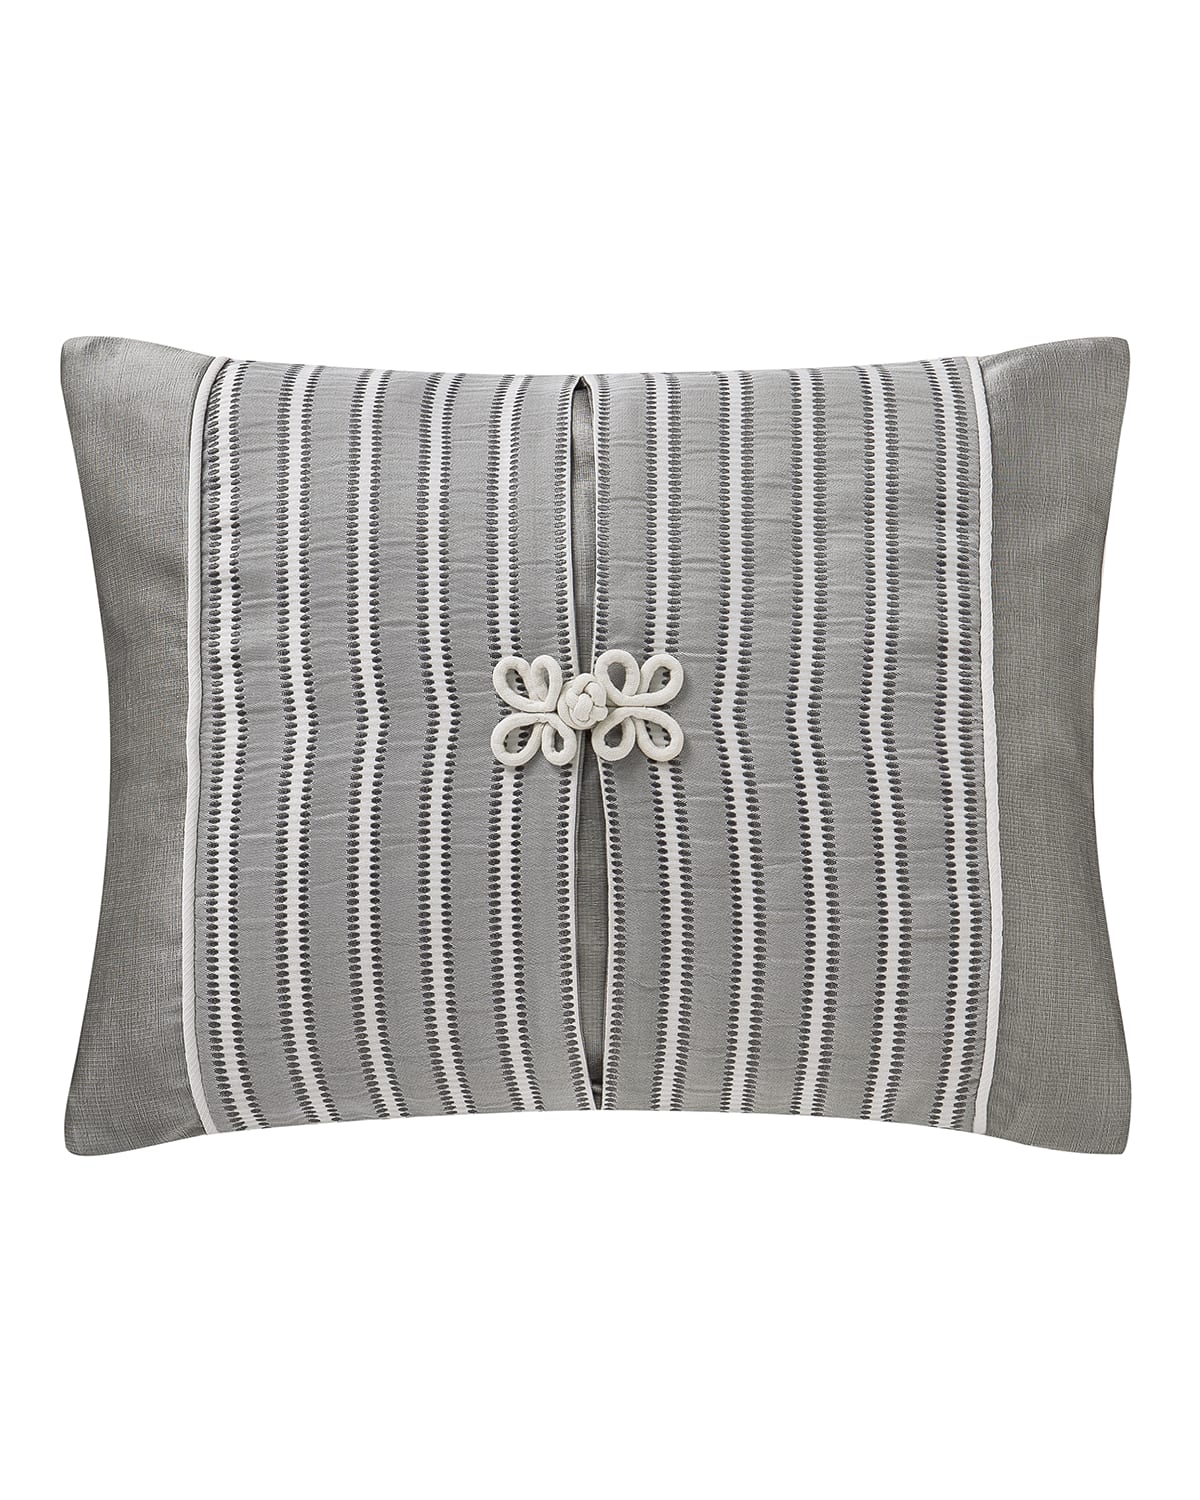 Image Waterford Celine Decorative Pillow, 16" x 20"